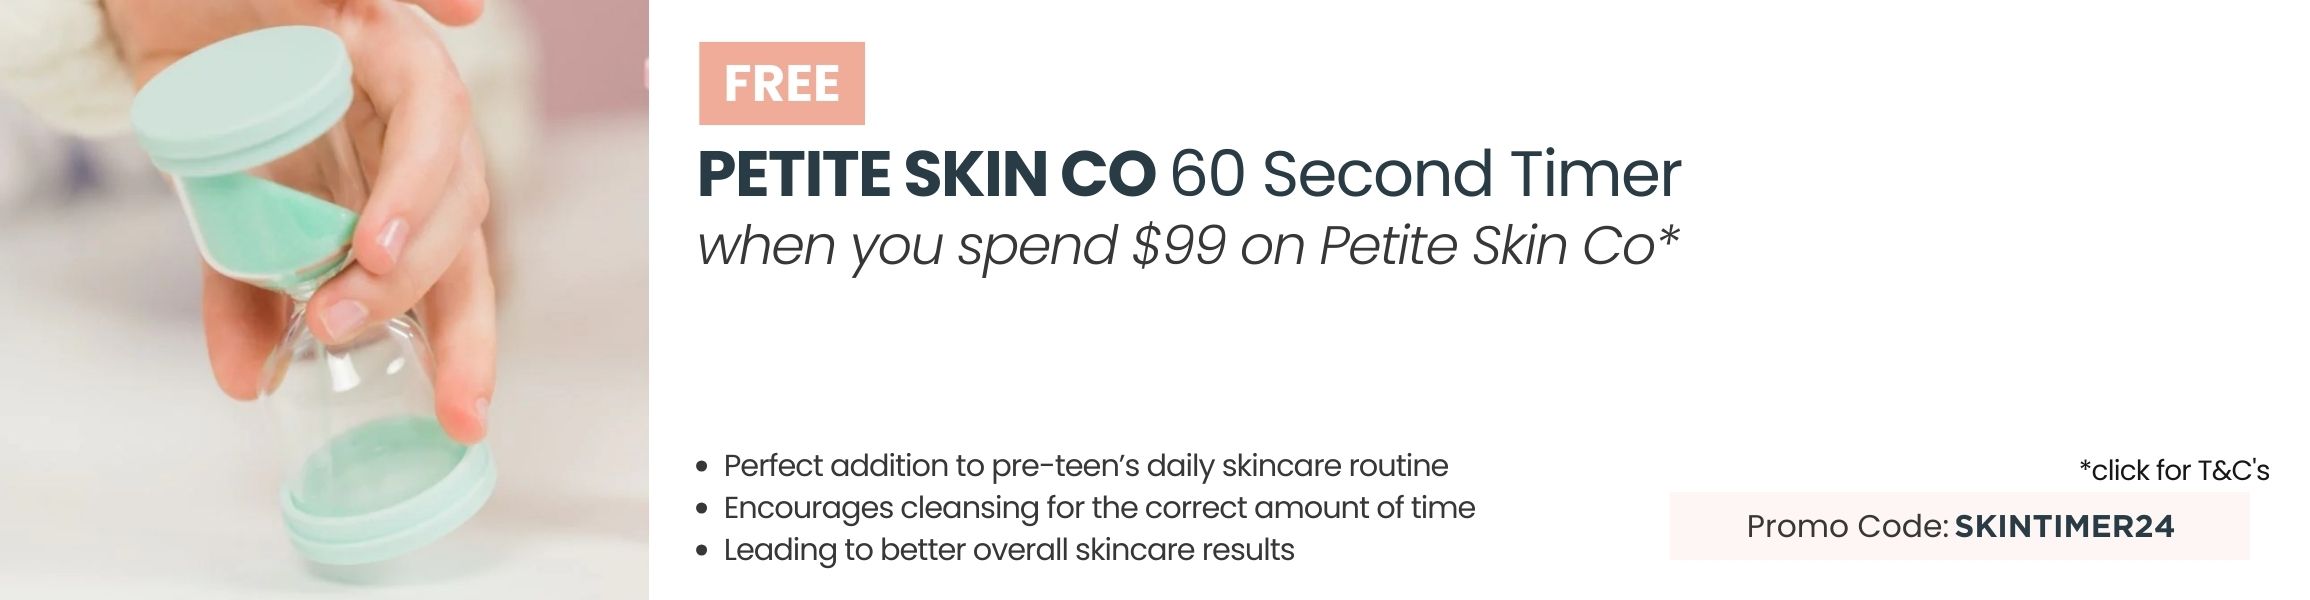 FREE Petite Skin Co 60 Second Timer. Min spend $99 on Petite Skin Co. Promo code: SKINTIMER24